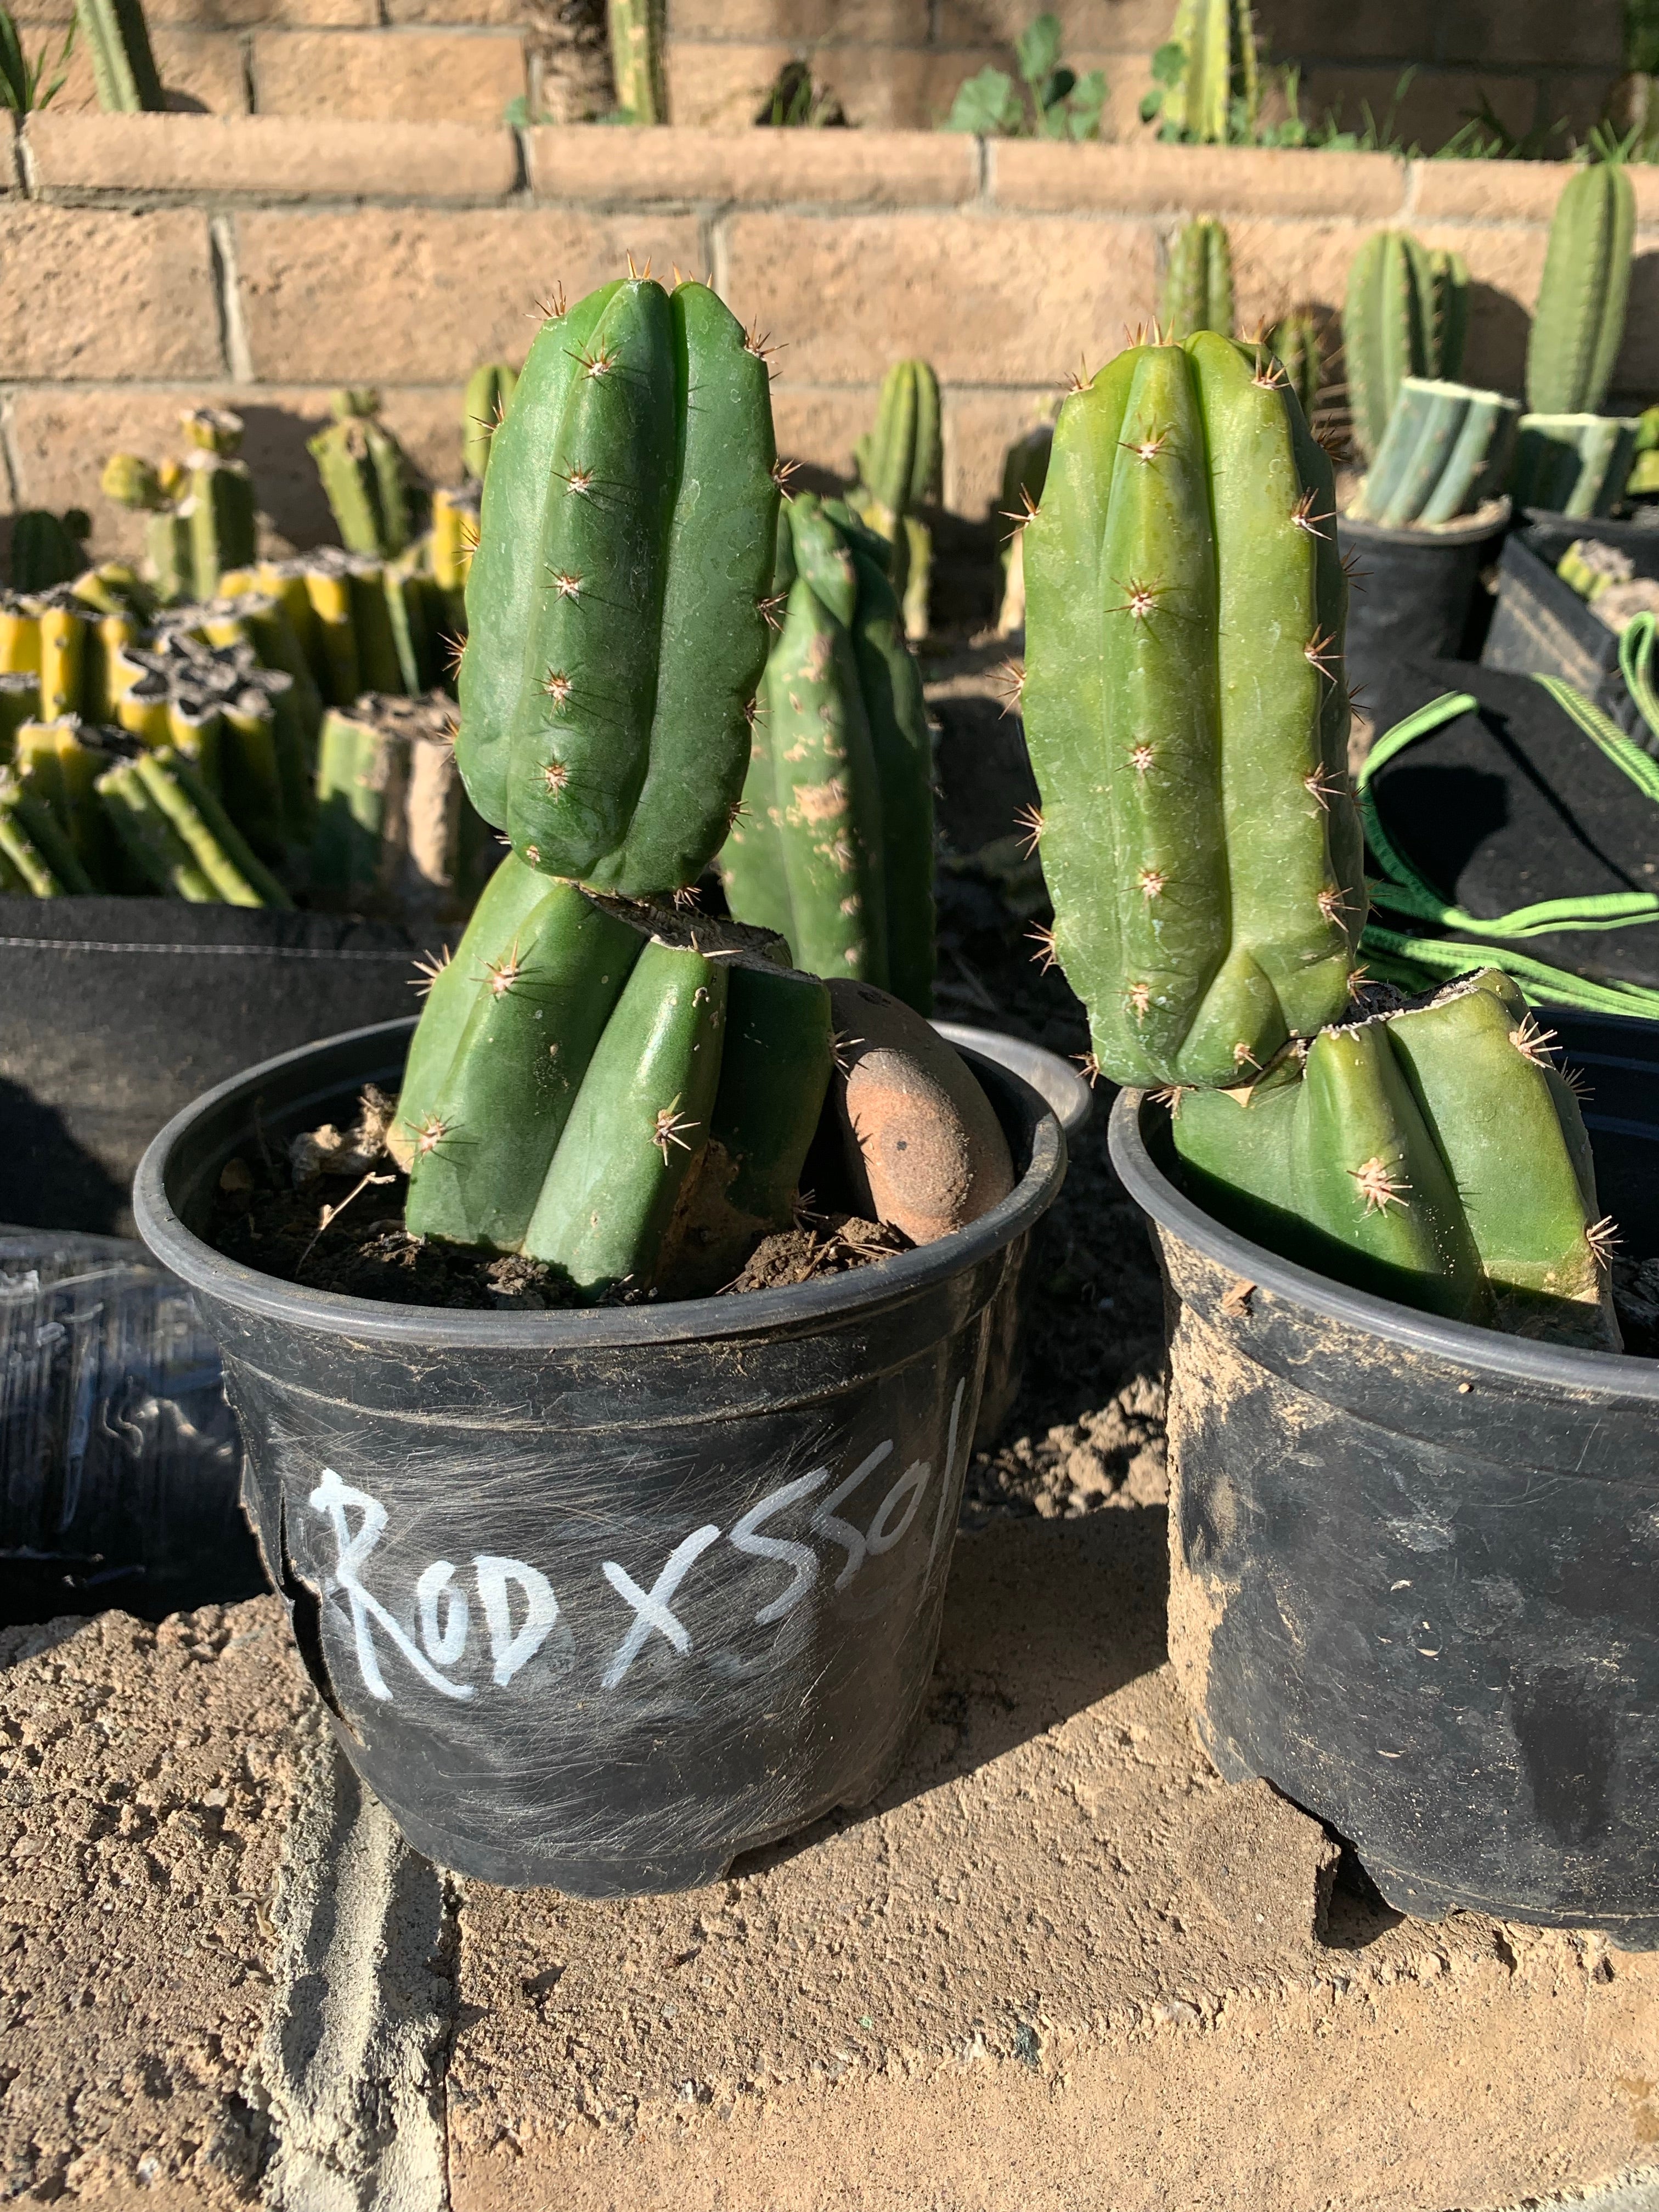 Rod x SS01  — well rooted with pup